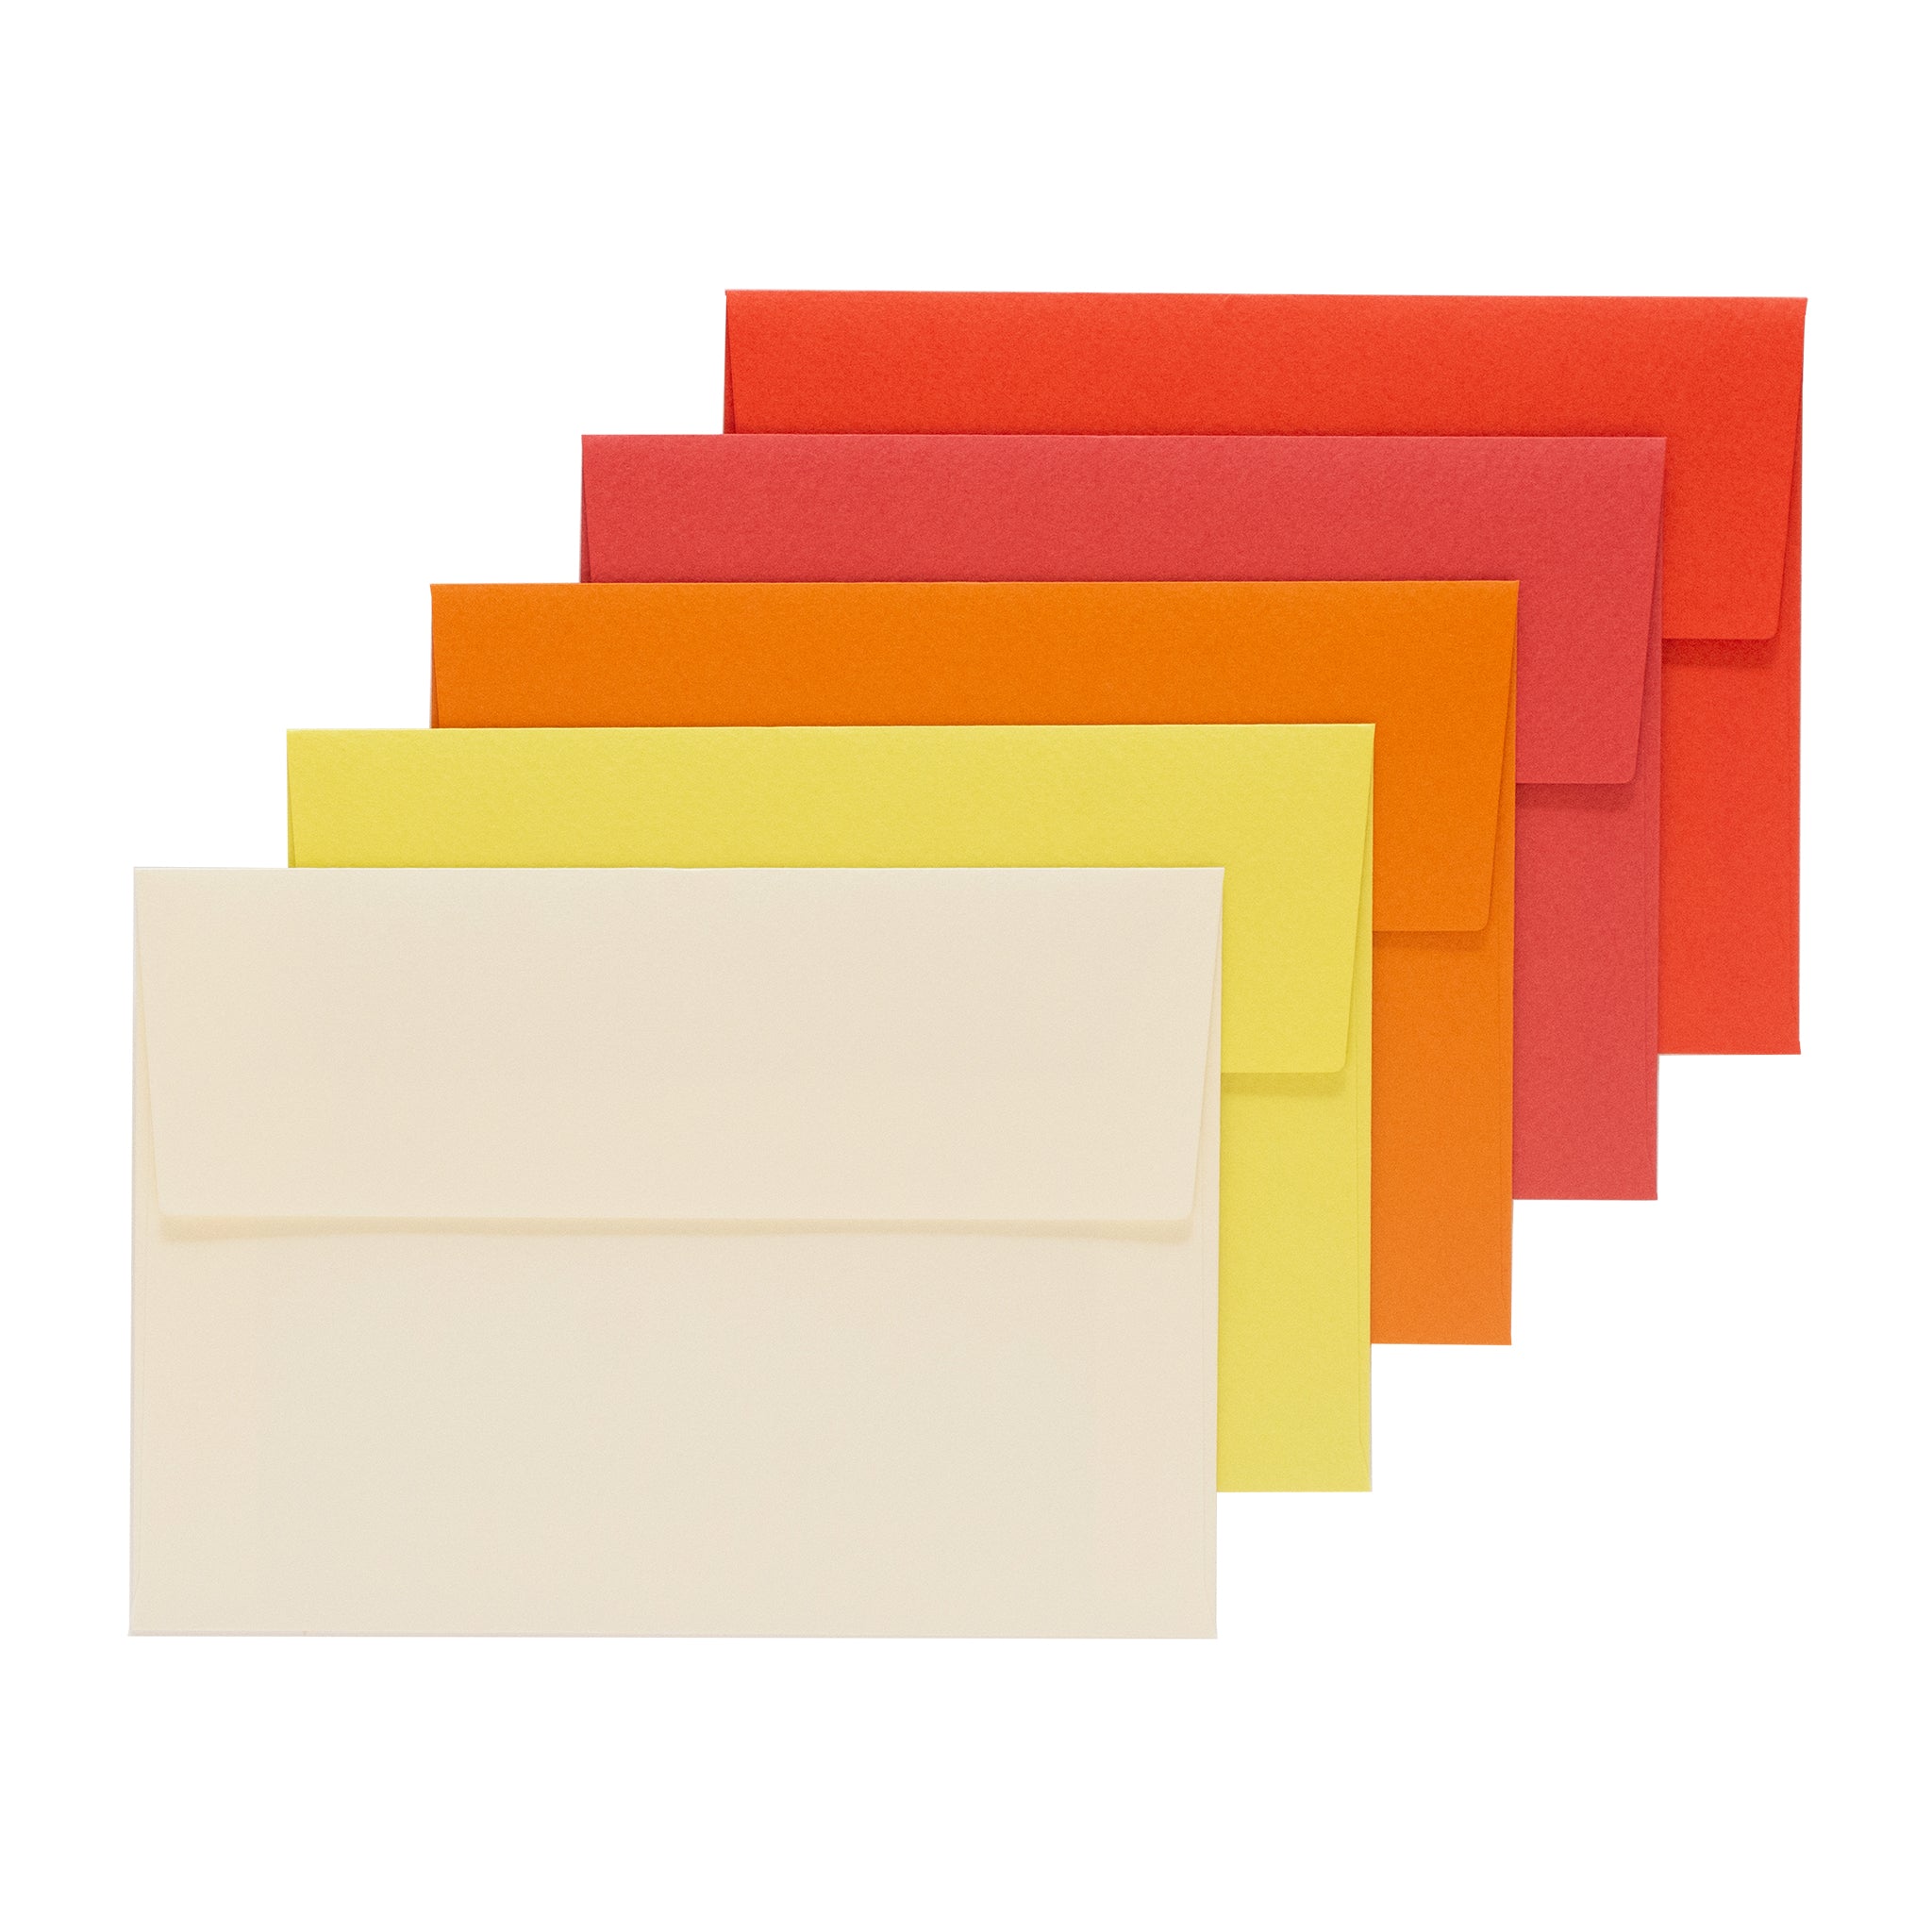 ENVELOPE 洋2封筒アソート マーメイド-R – products.takeopaper.com